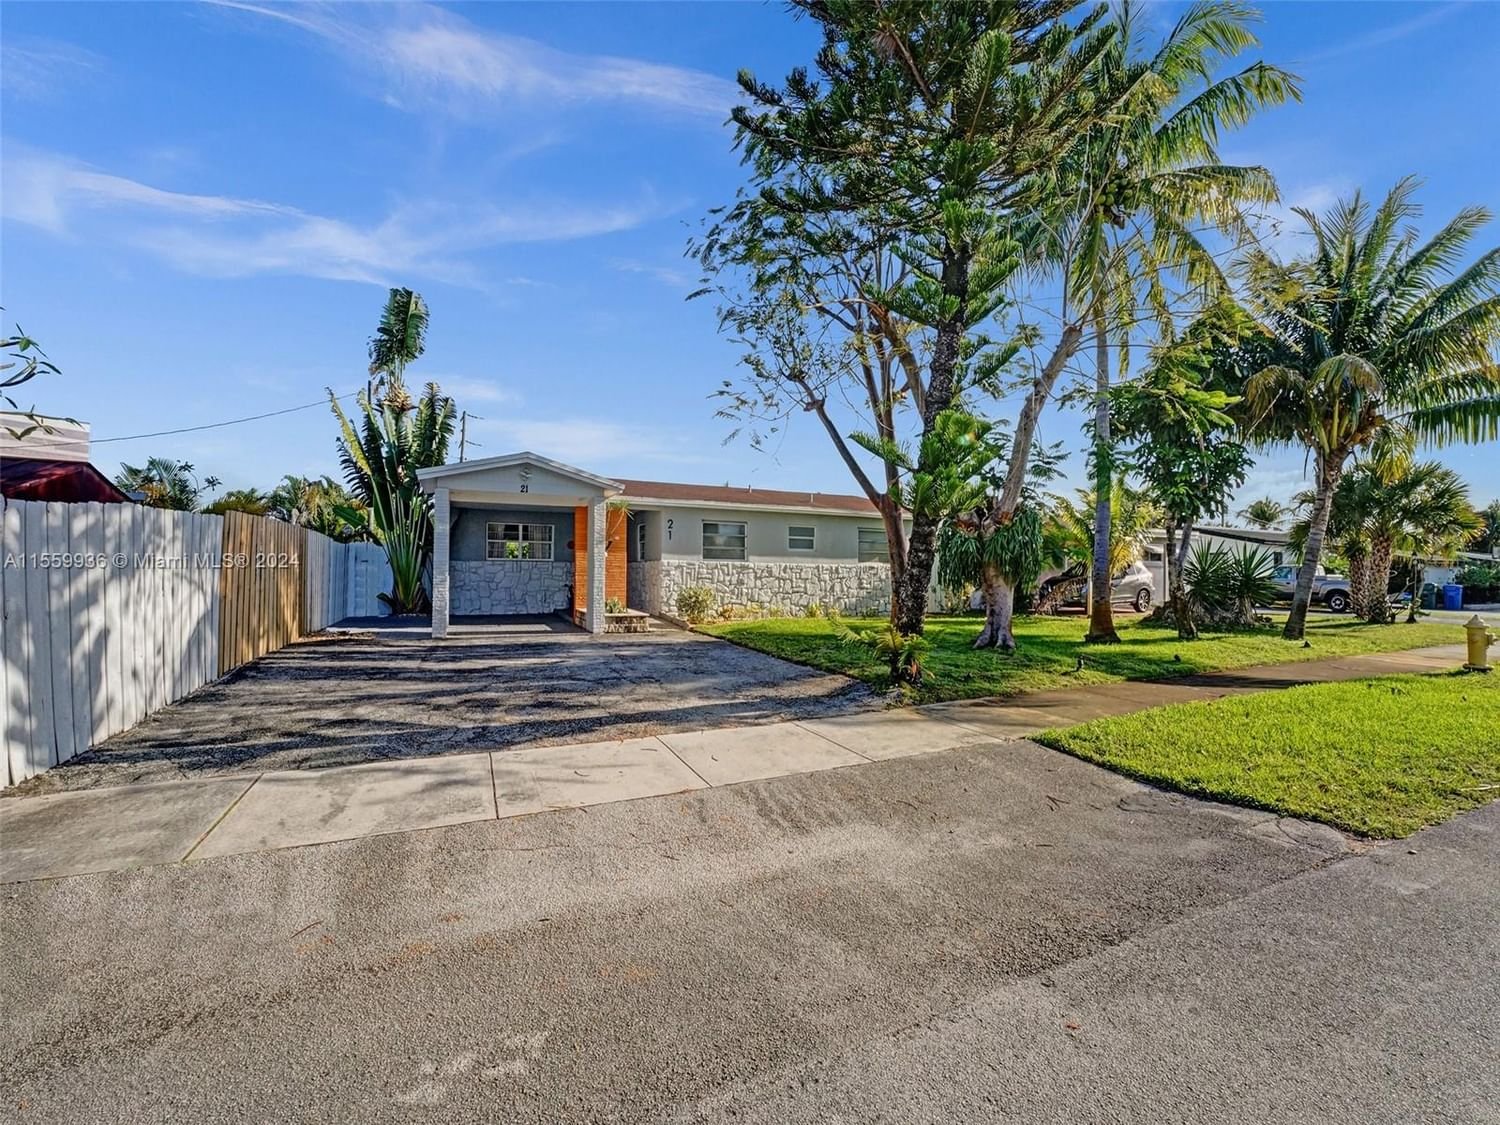 Real estate property located at 21 57th Ct, Broward County, PATTERSON PARK 1ST ADD, Oakland Park, FL